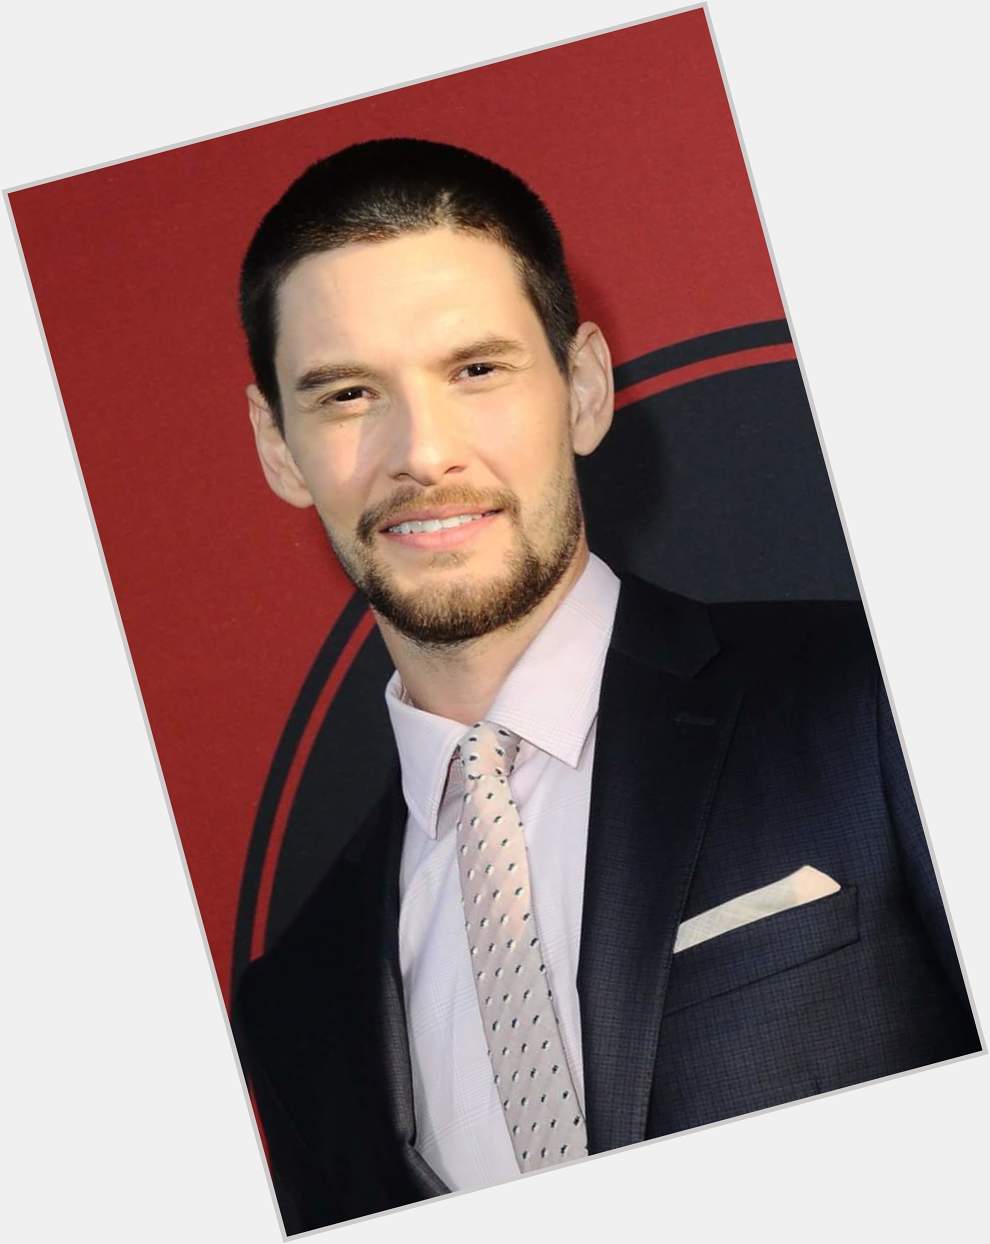 HAPPY BIRTHDAY, Mr. Ben Barnes, blessings, long and happy life, from Popayán Colombia. 